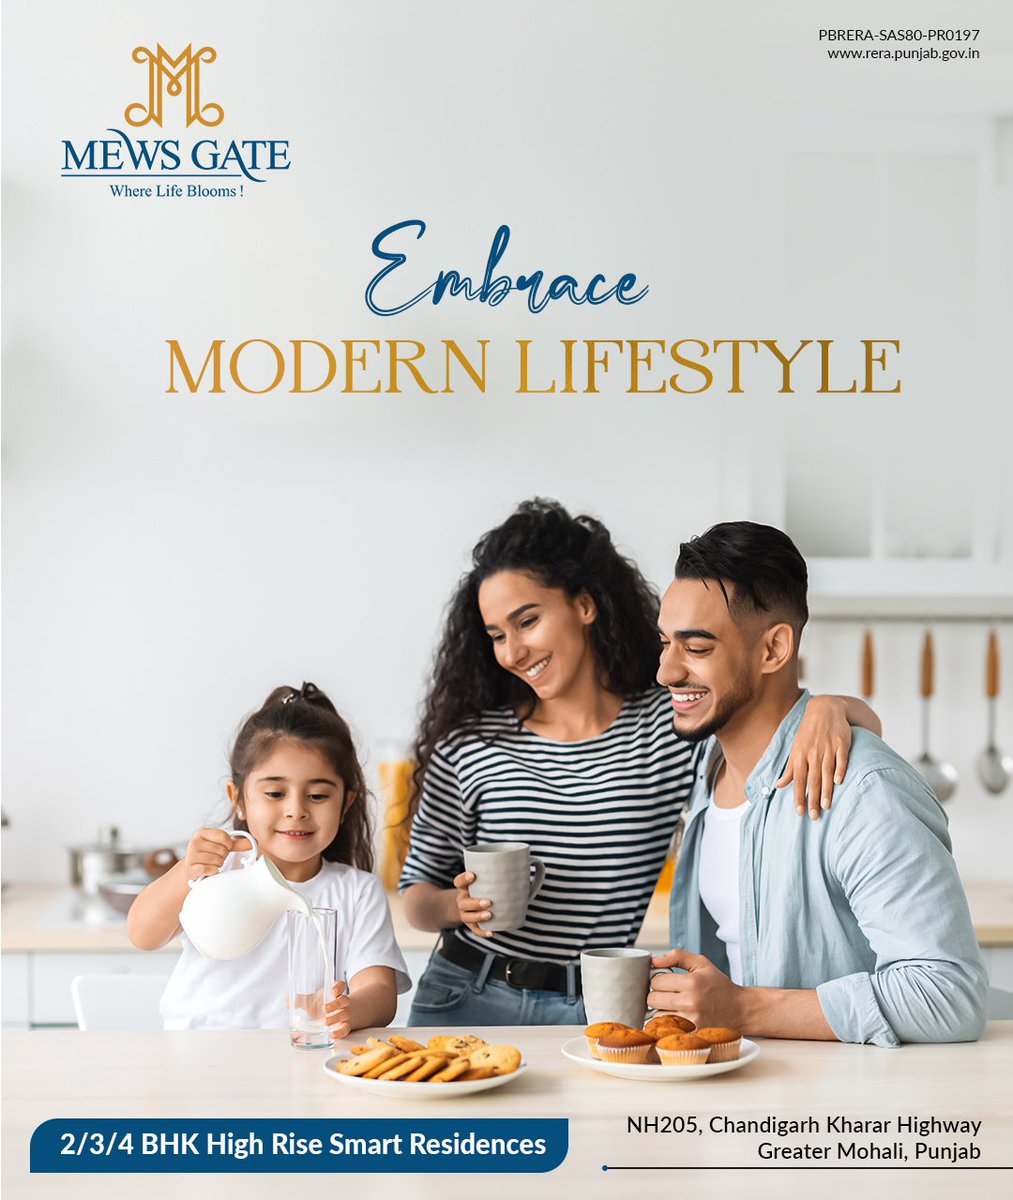 Welcome to Mews Gate, where every corner exudes the essence of contemporary living.

🏠2/3/4 BHK High-Rise Smart Residences 
📍NH 205, Chandigarh Kharar Highway Greater Mohali, Punjab 

↘️ Call us at 90695-90695 

#MewsGate #SmartResidences #Mohali #Kharar #CityLiving